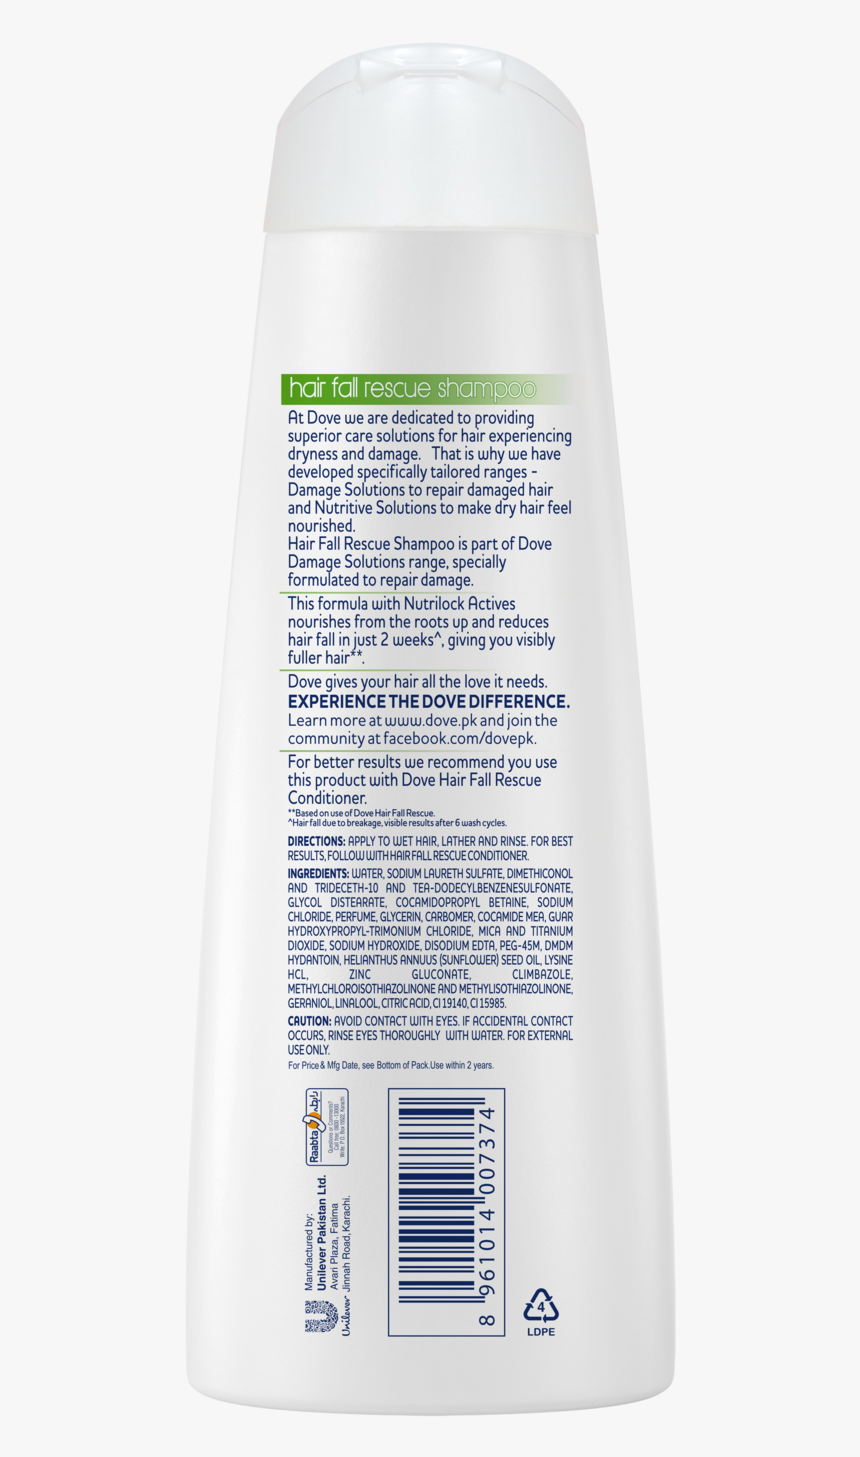 Hair Fall Rescue Shampoo Back360ml 8961014007374 798821 - Dove Hair Fall Rescue Shampoo Ingredients, HD Png Download, Free Download